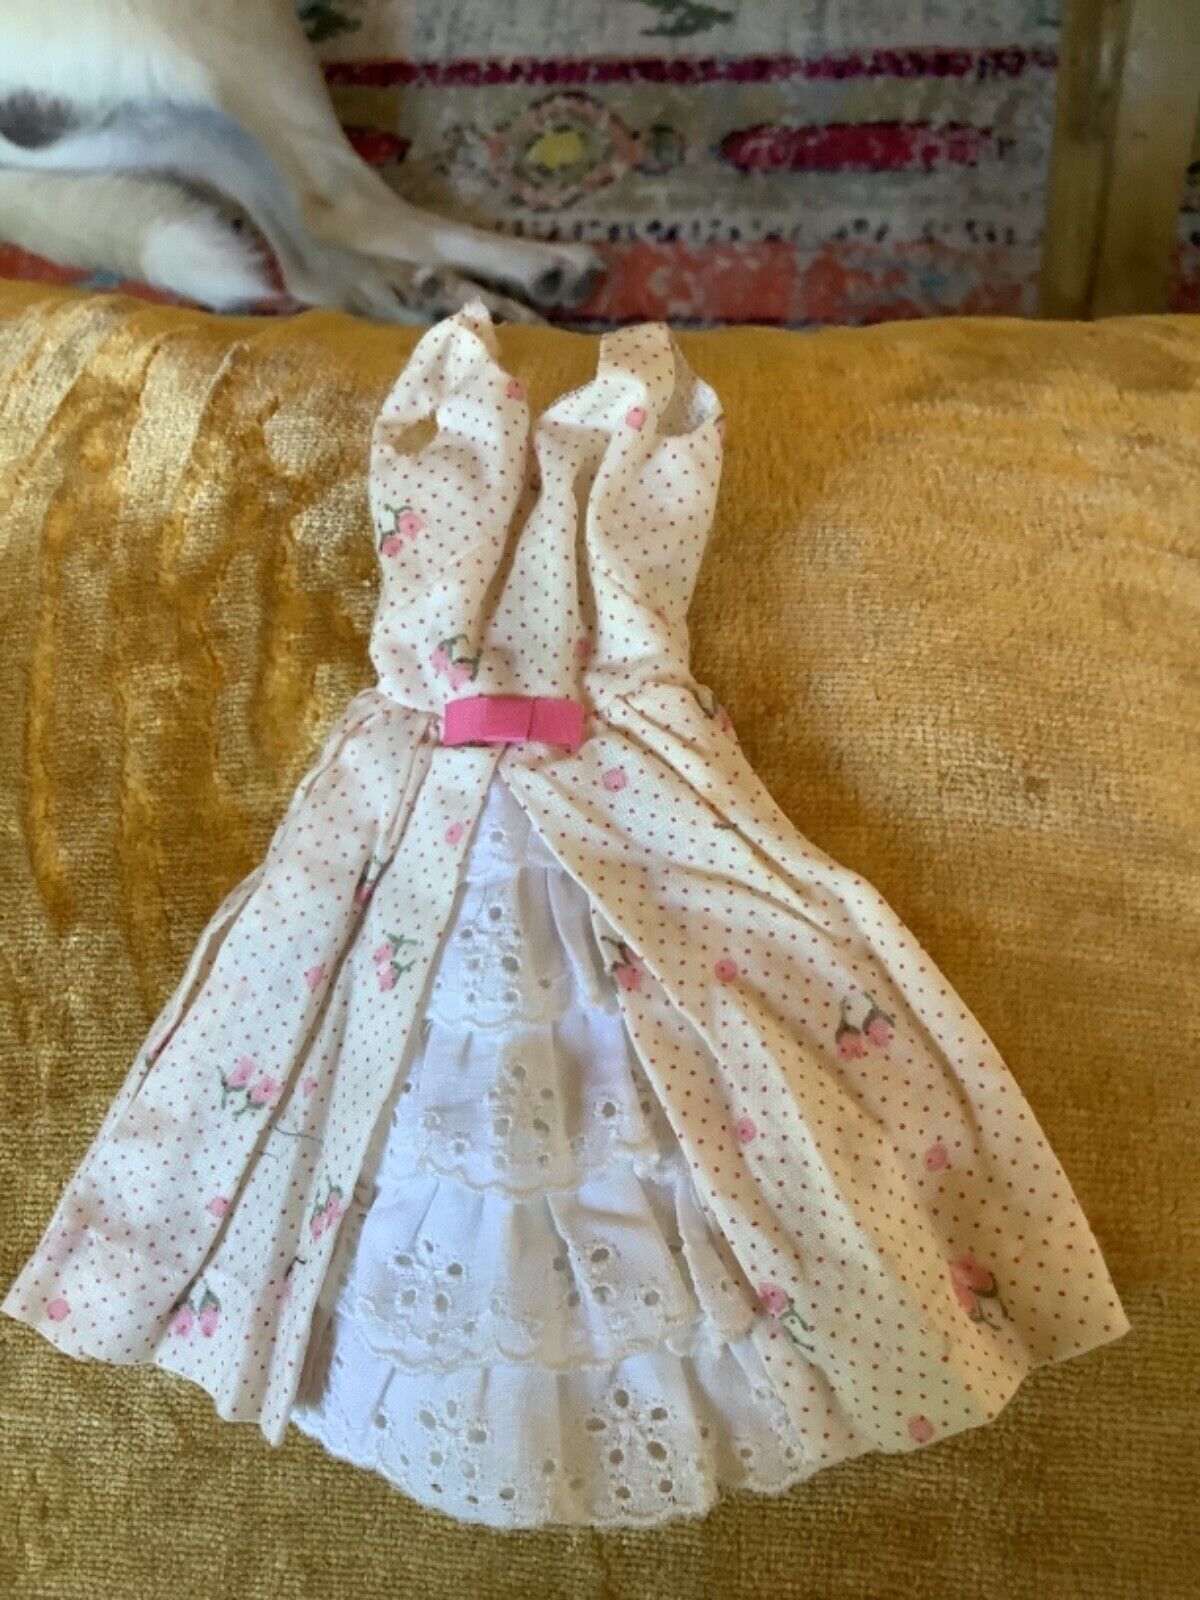 Vintage Barbie Garden Party 1962-63 Rose Print Dress With Eyelet Lace Insert...